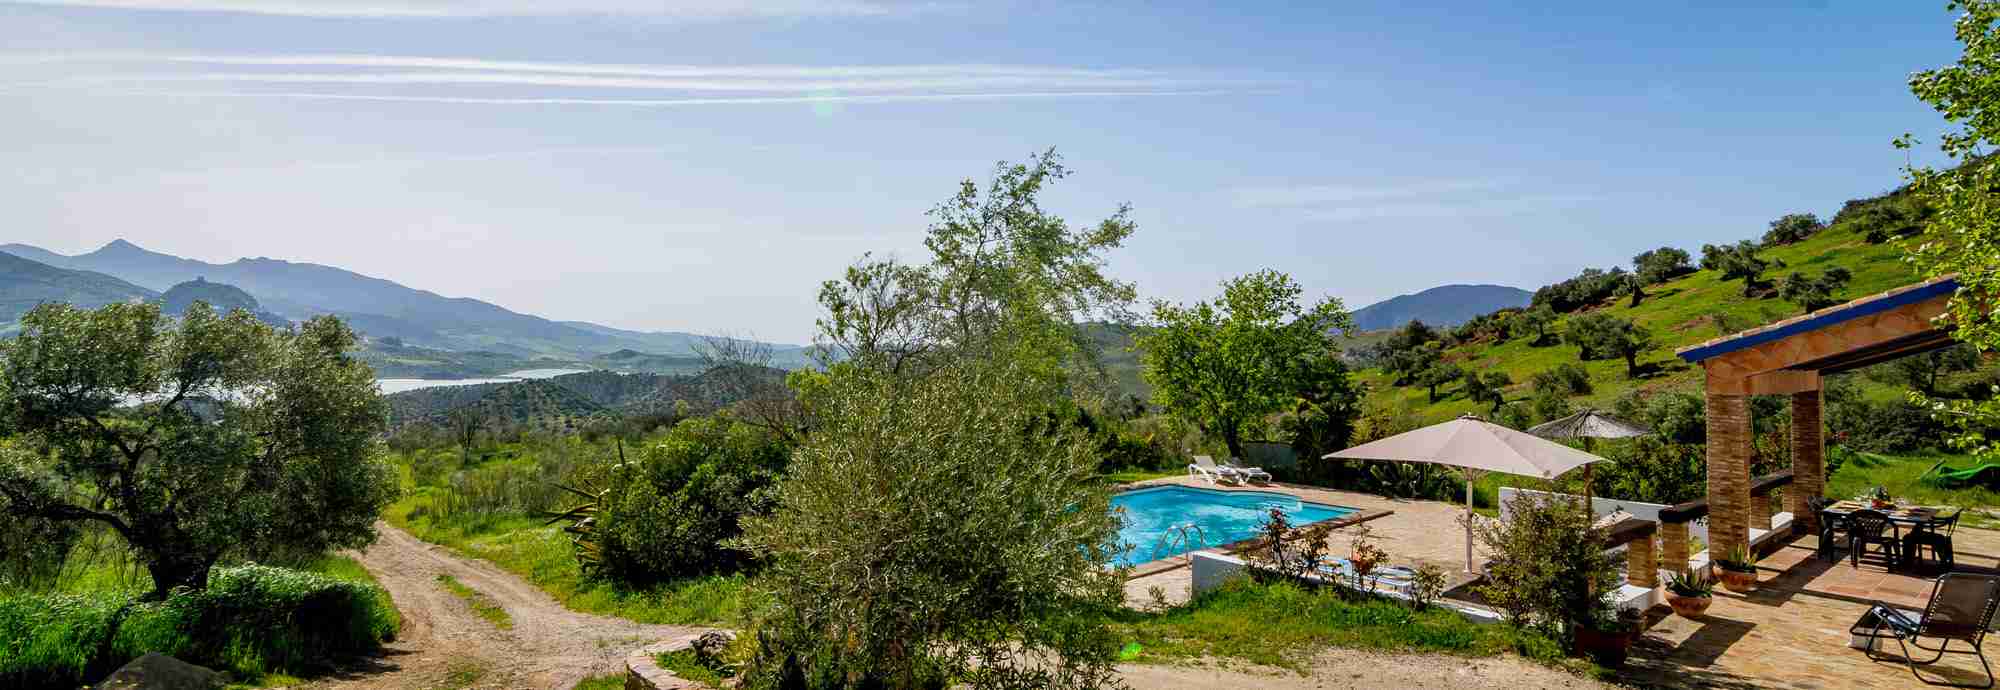 Perfectly private Ronda villa on hillside above a turquoise lake 